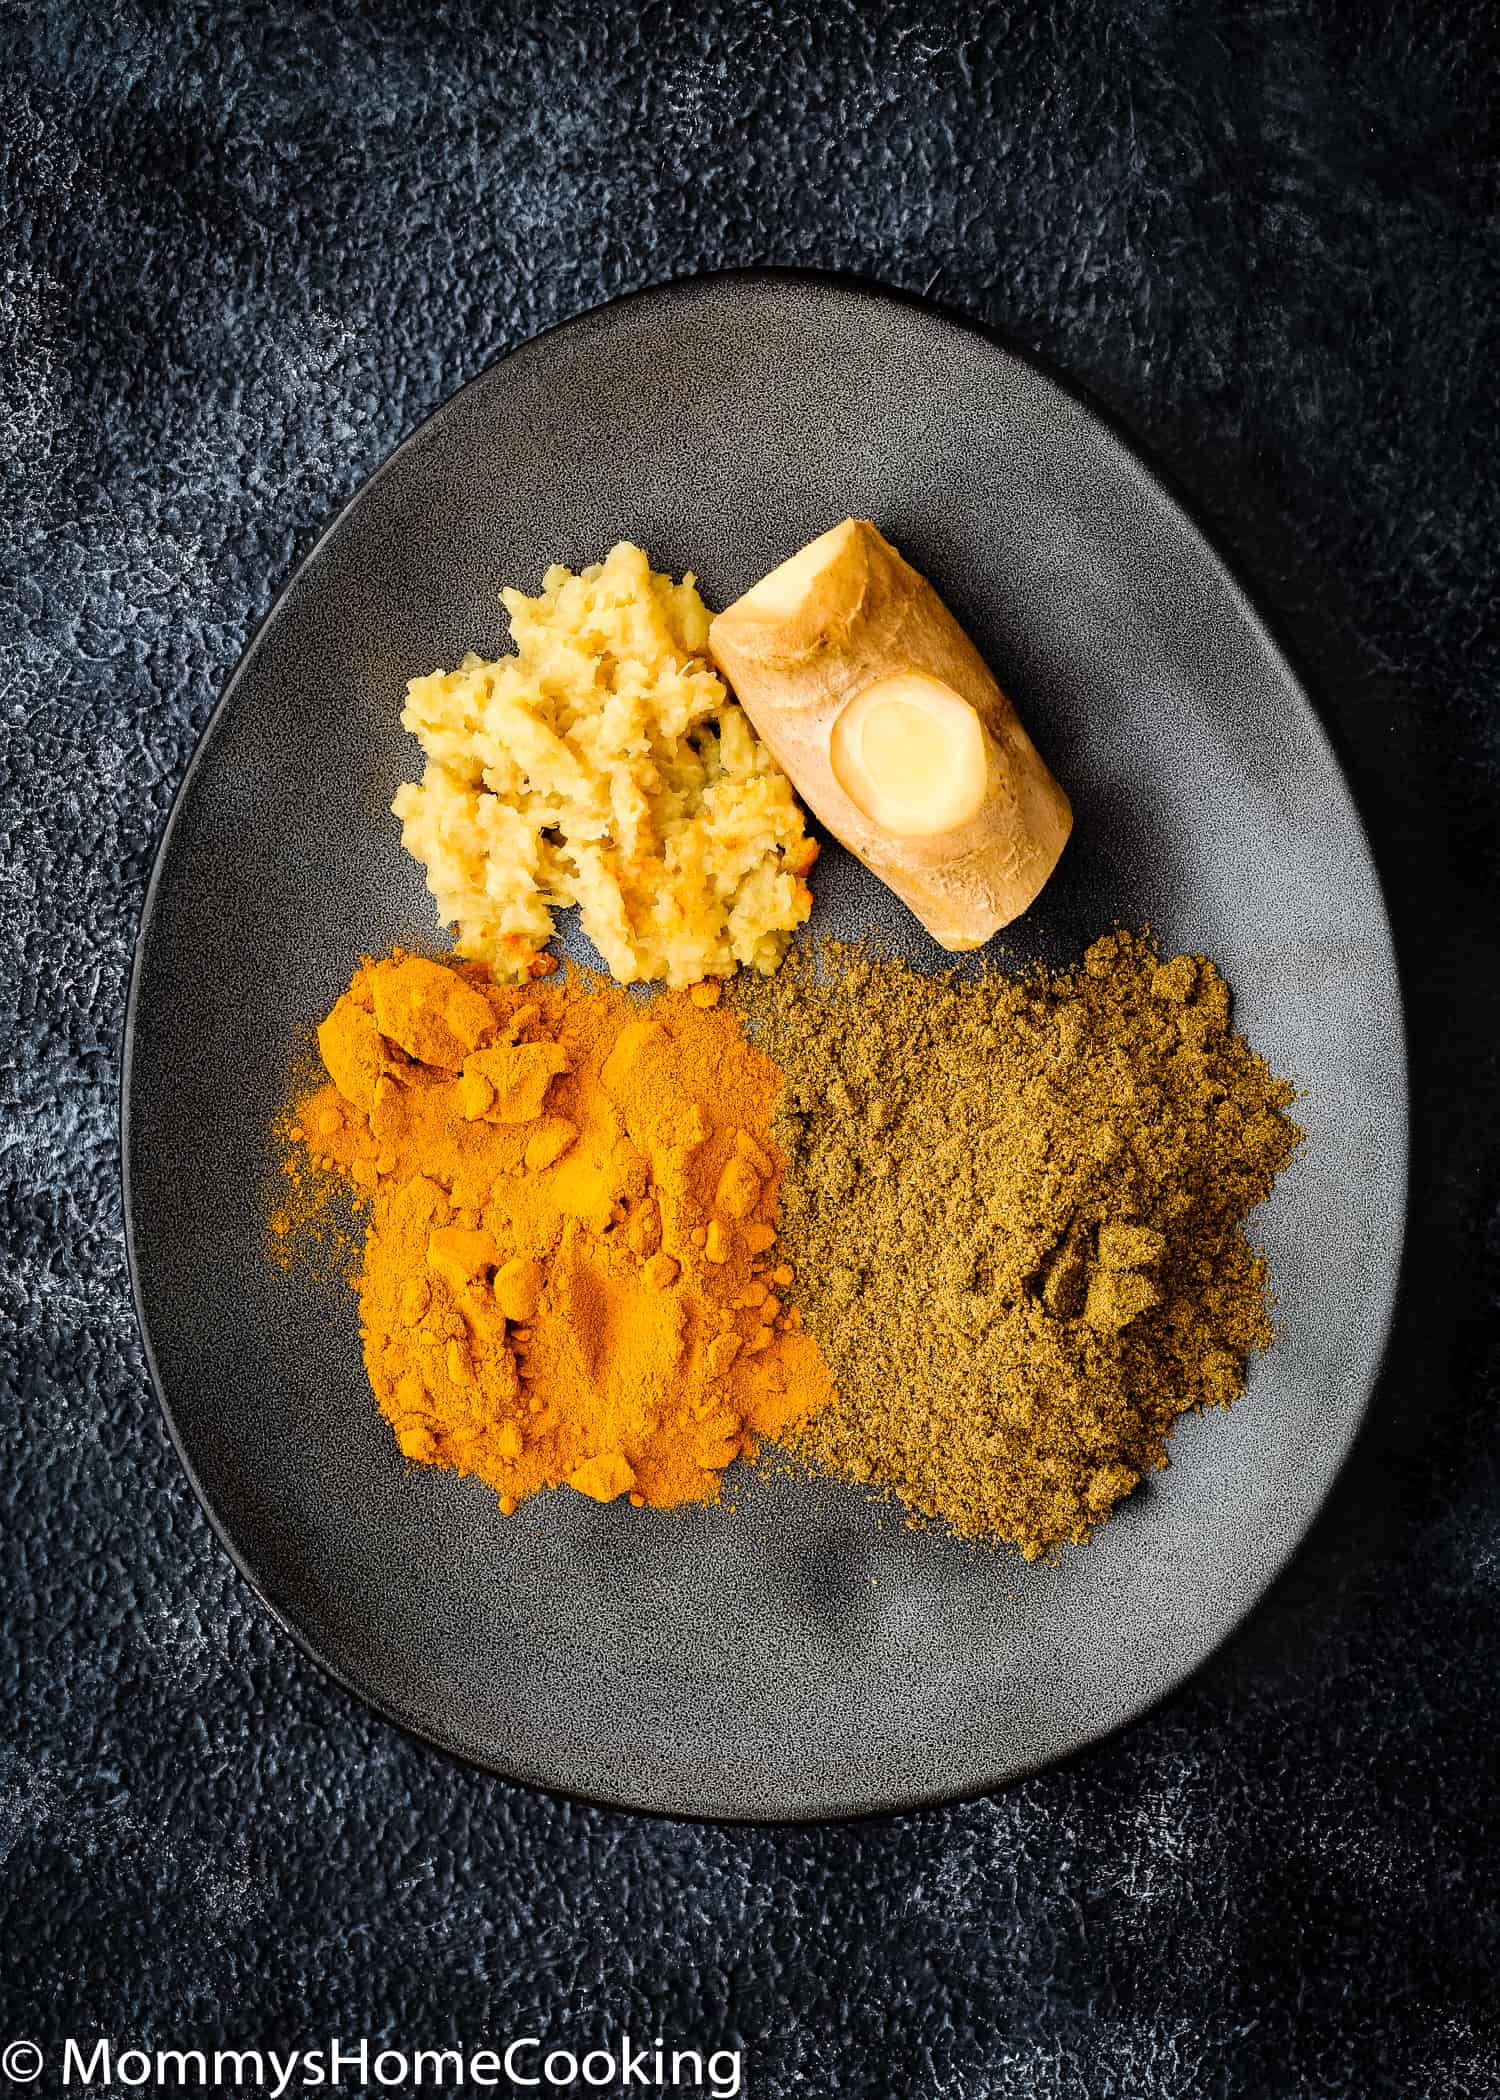 ginger, turmeric and cumin in a black plate. 